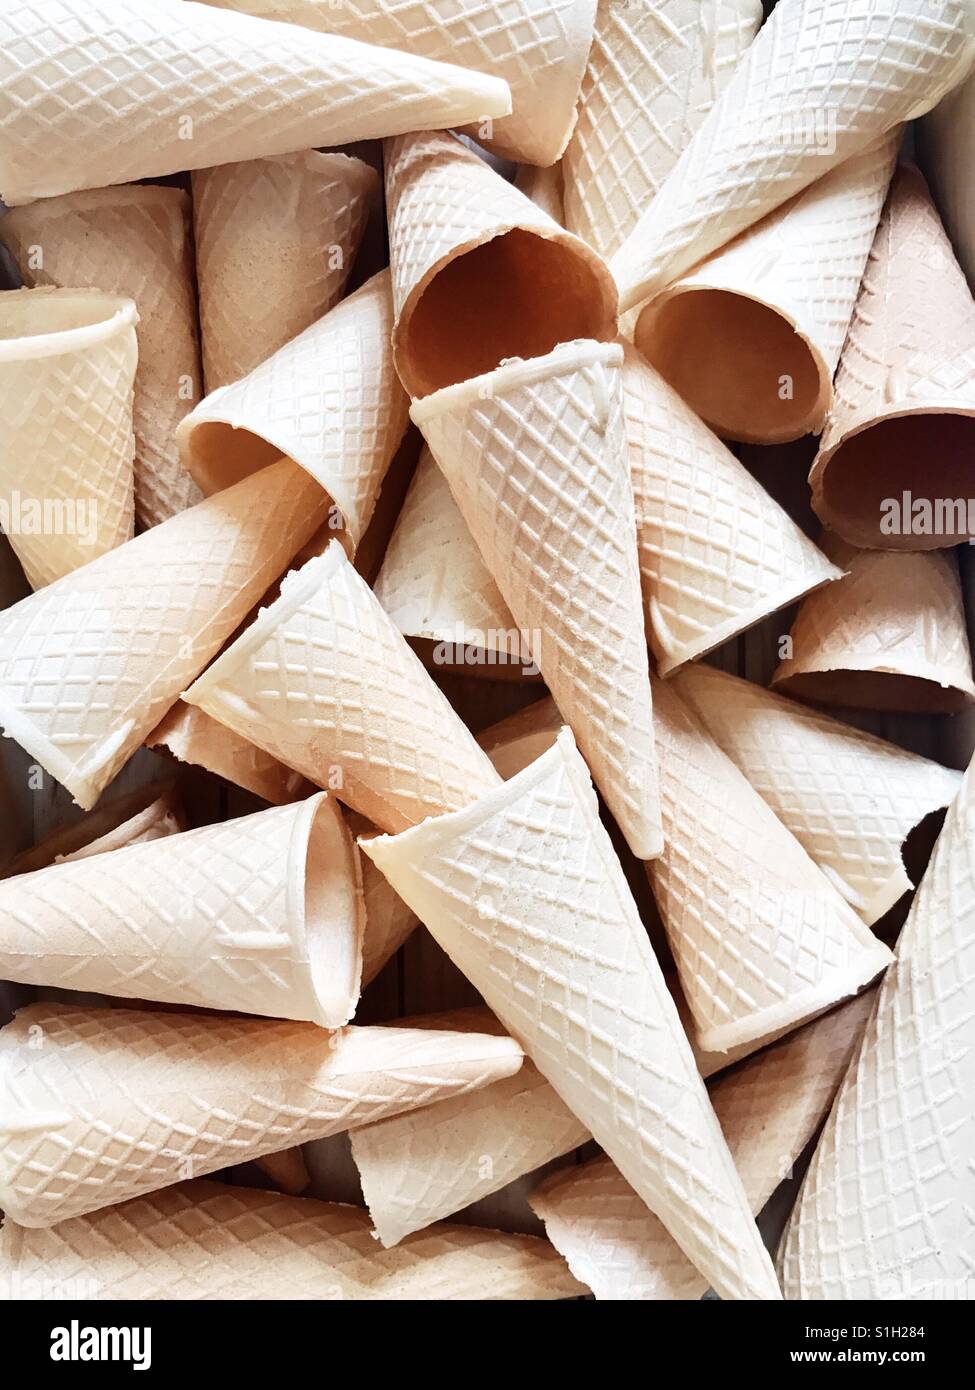 Fragile wafers for ice cream Stock Photo